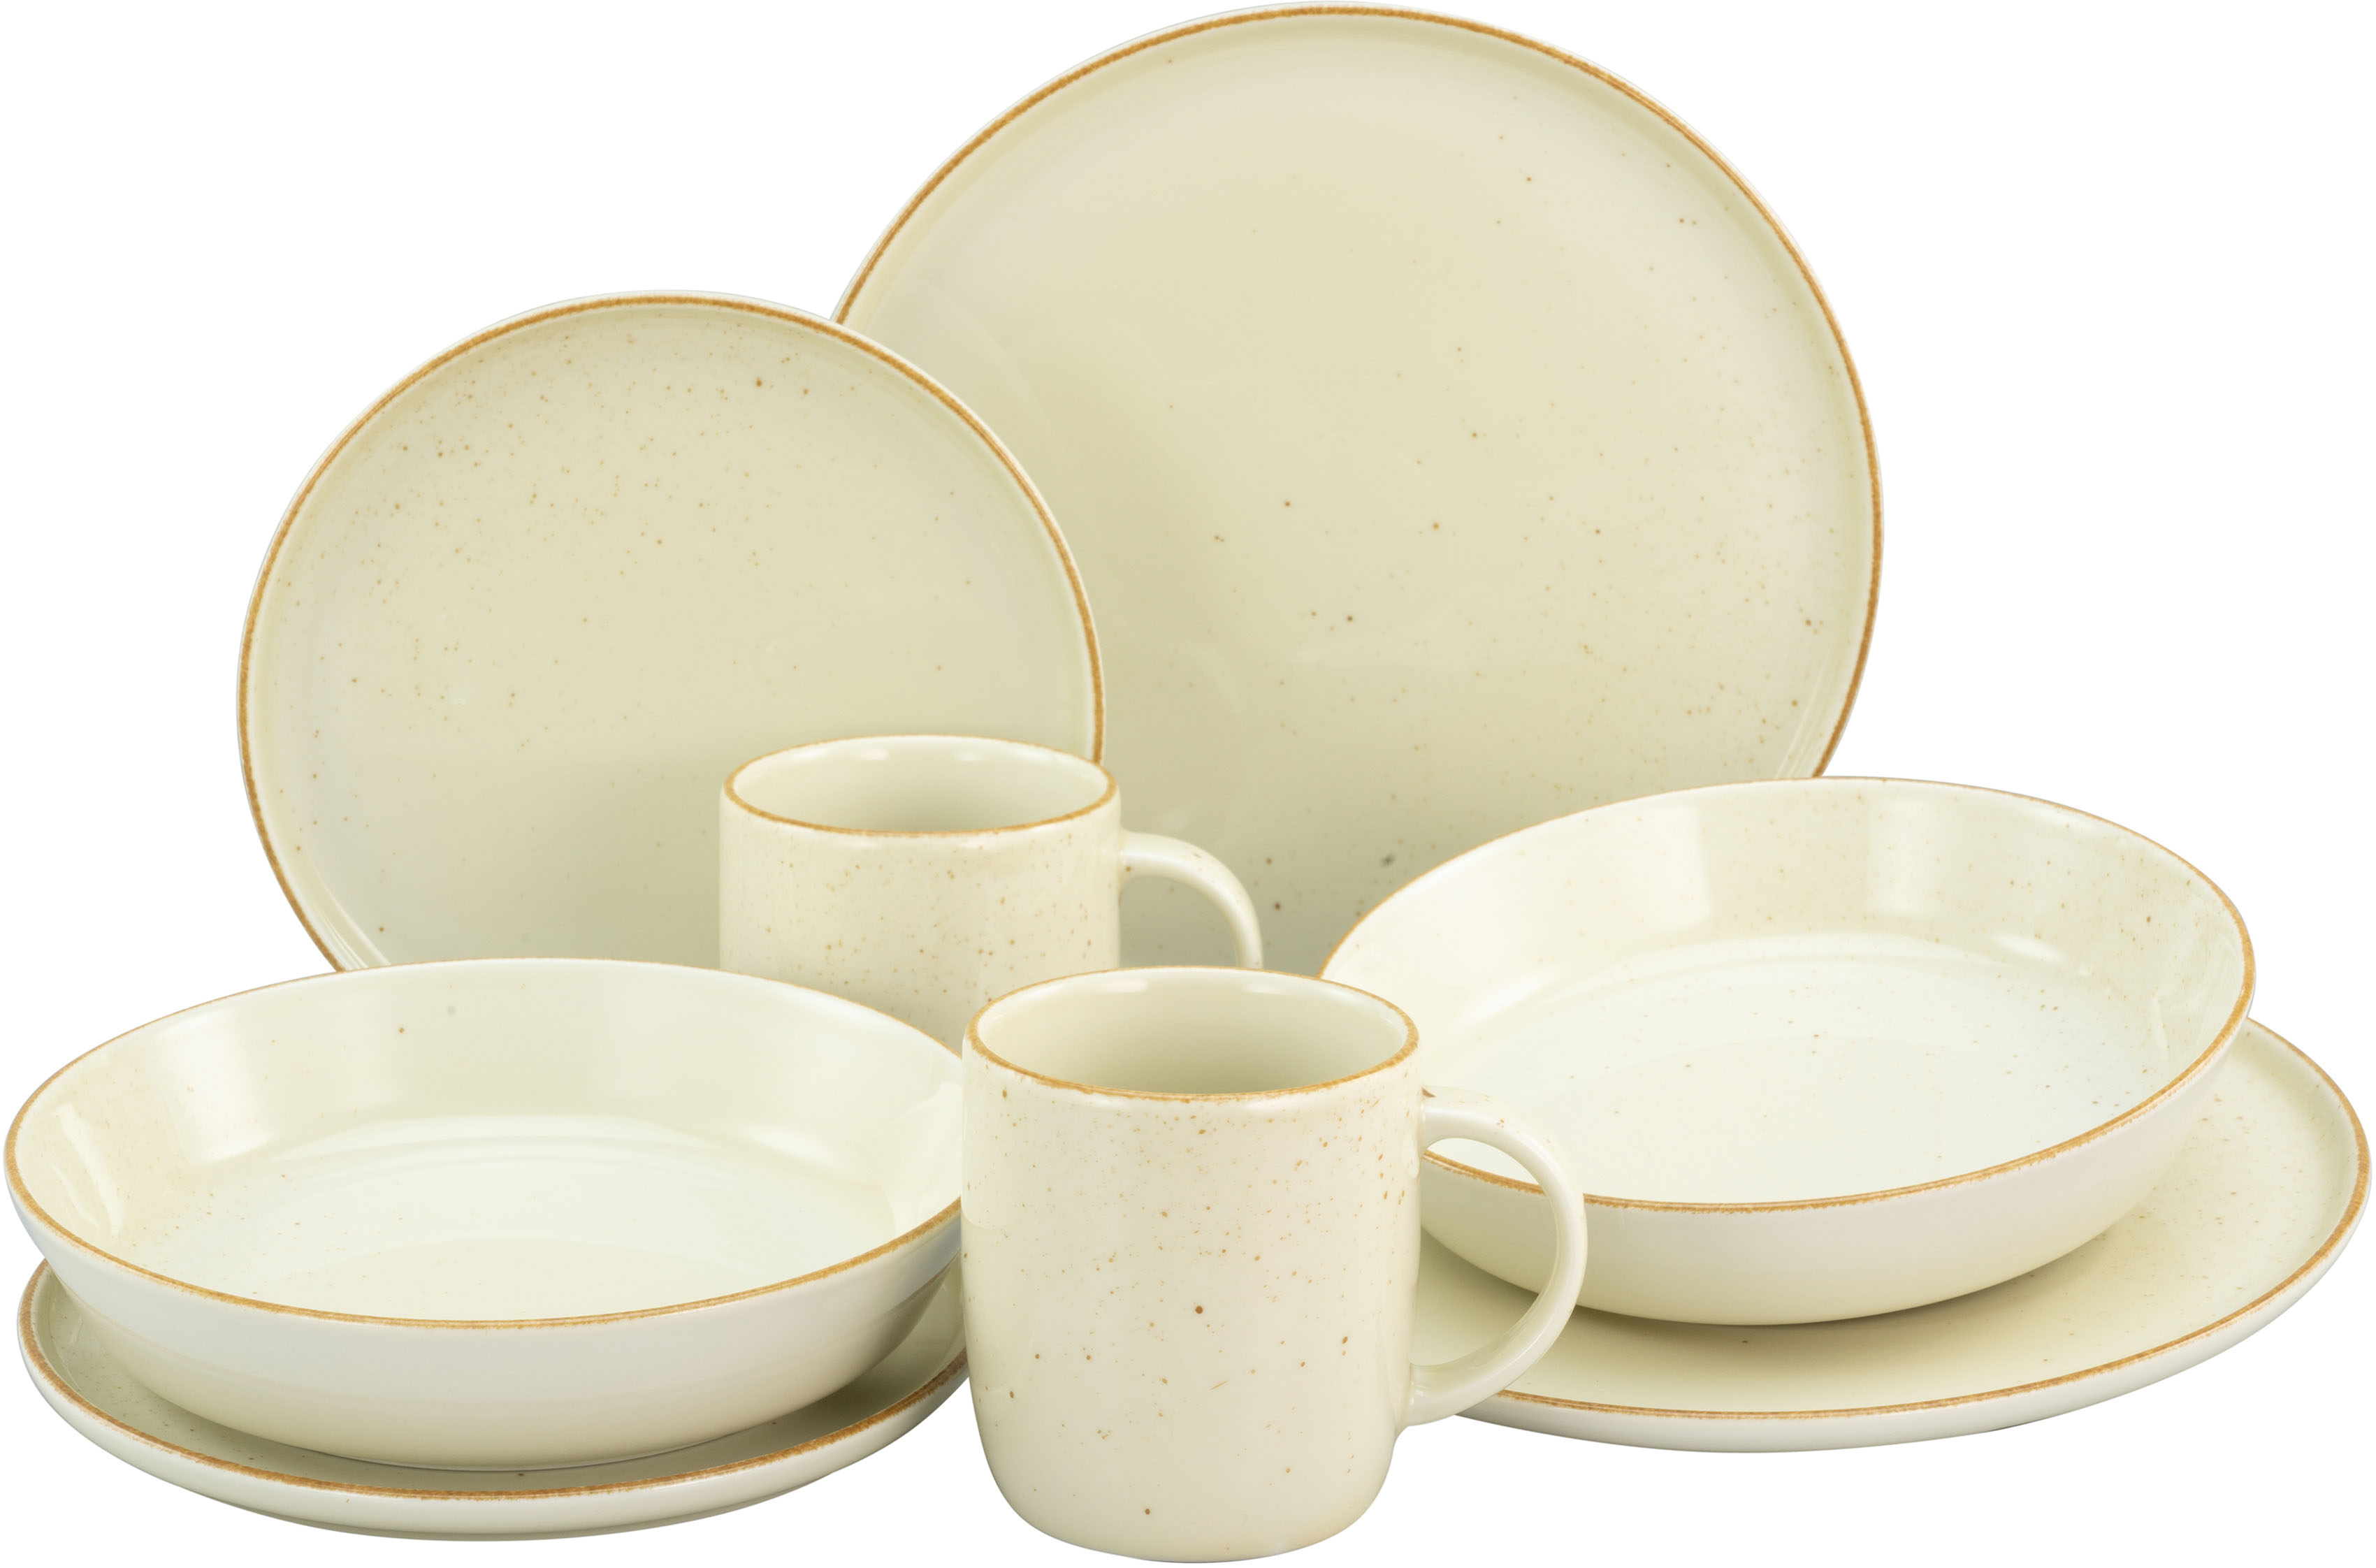 Corelle forever yours dishes